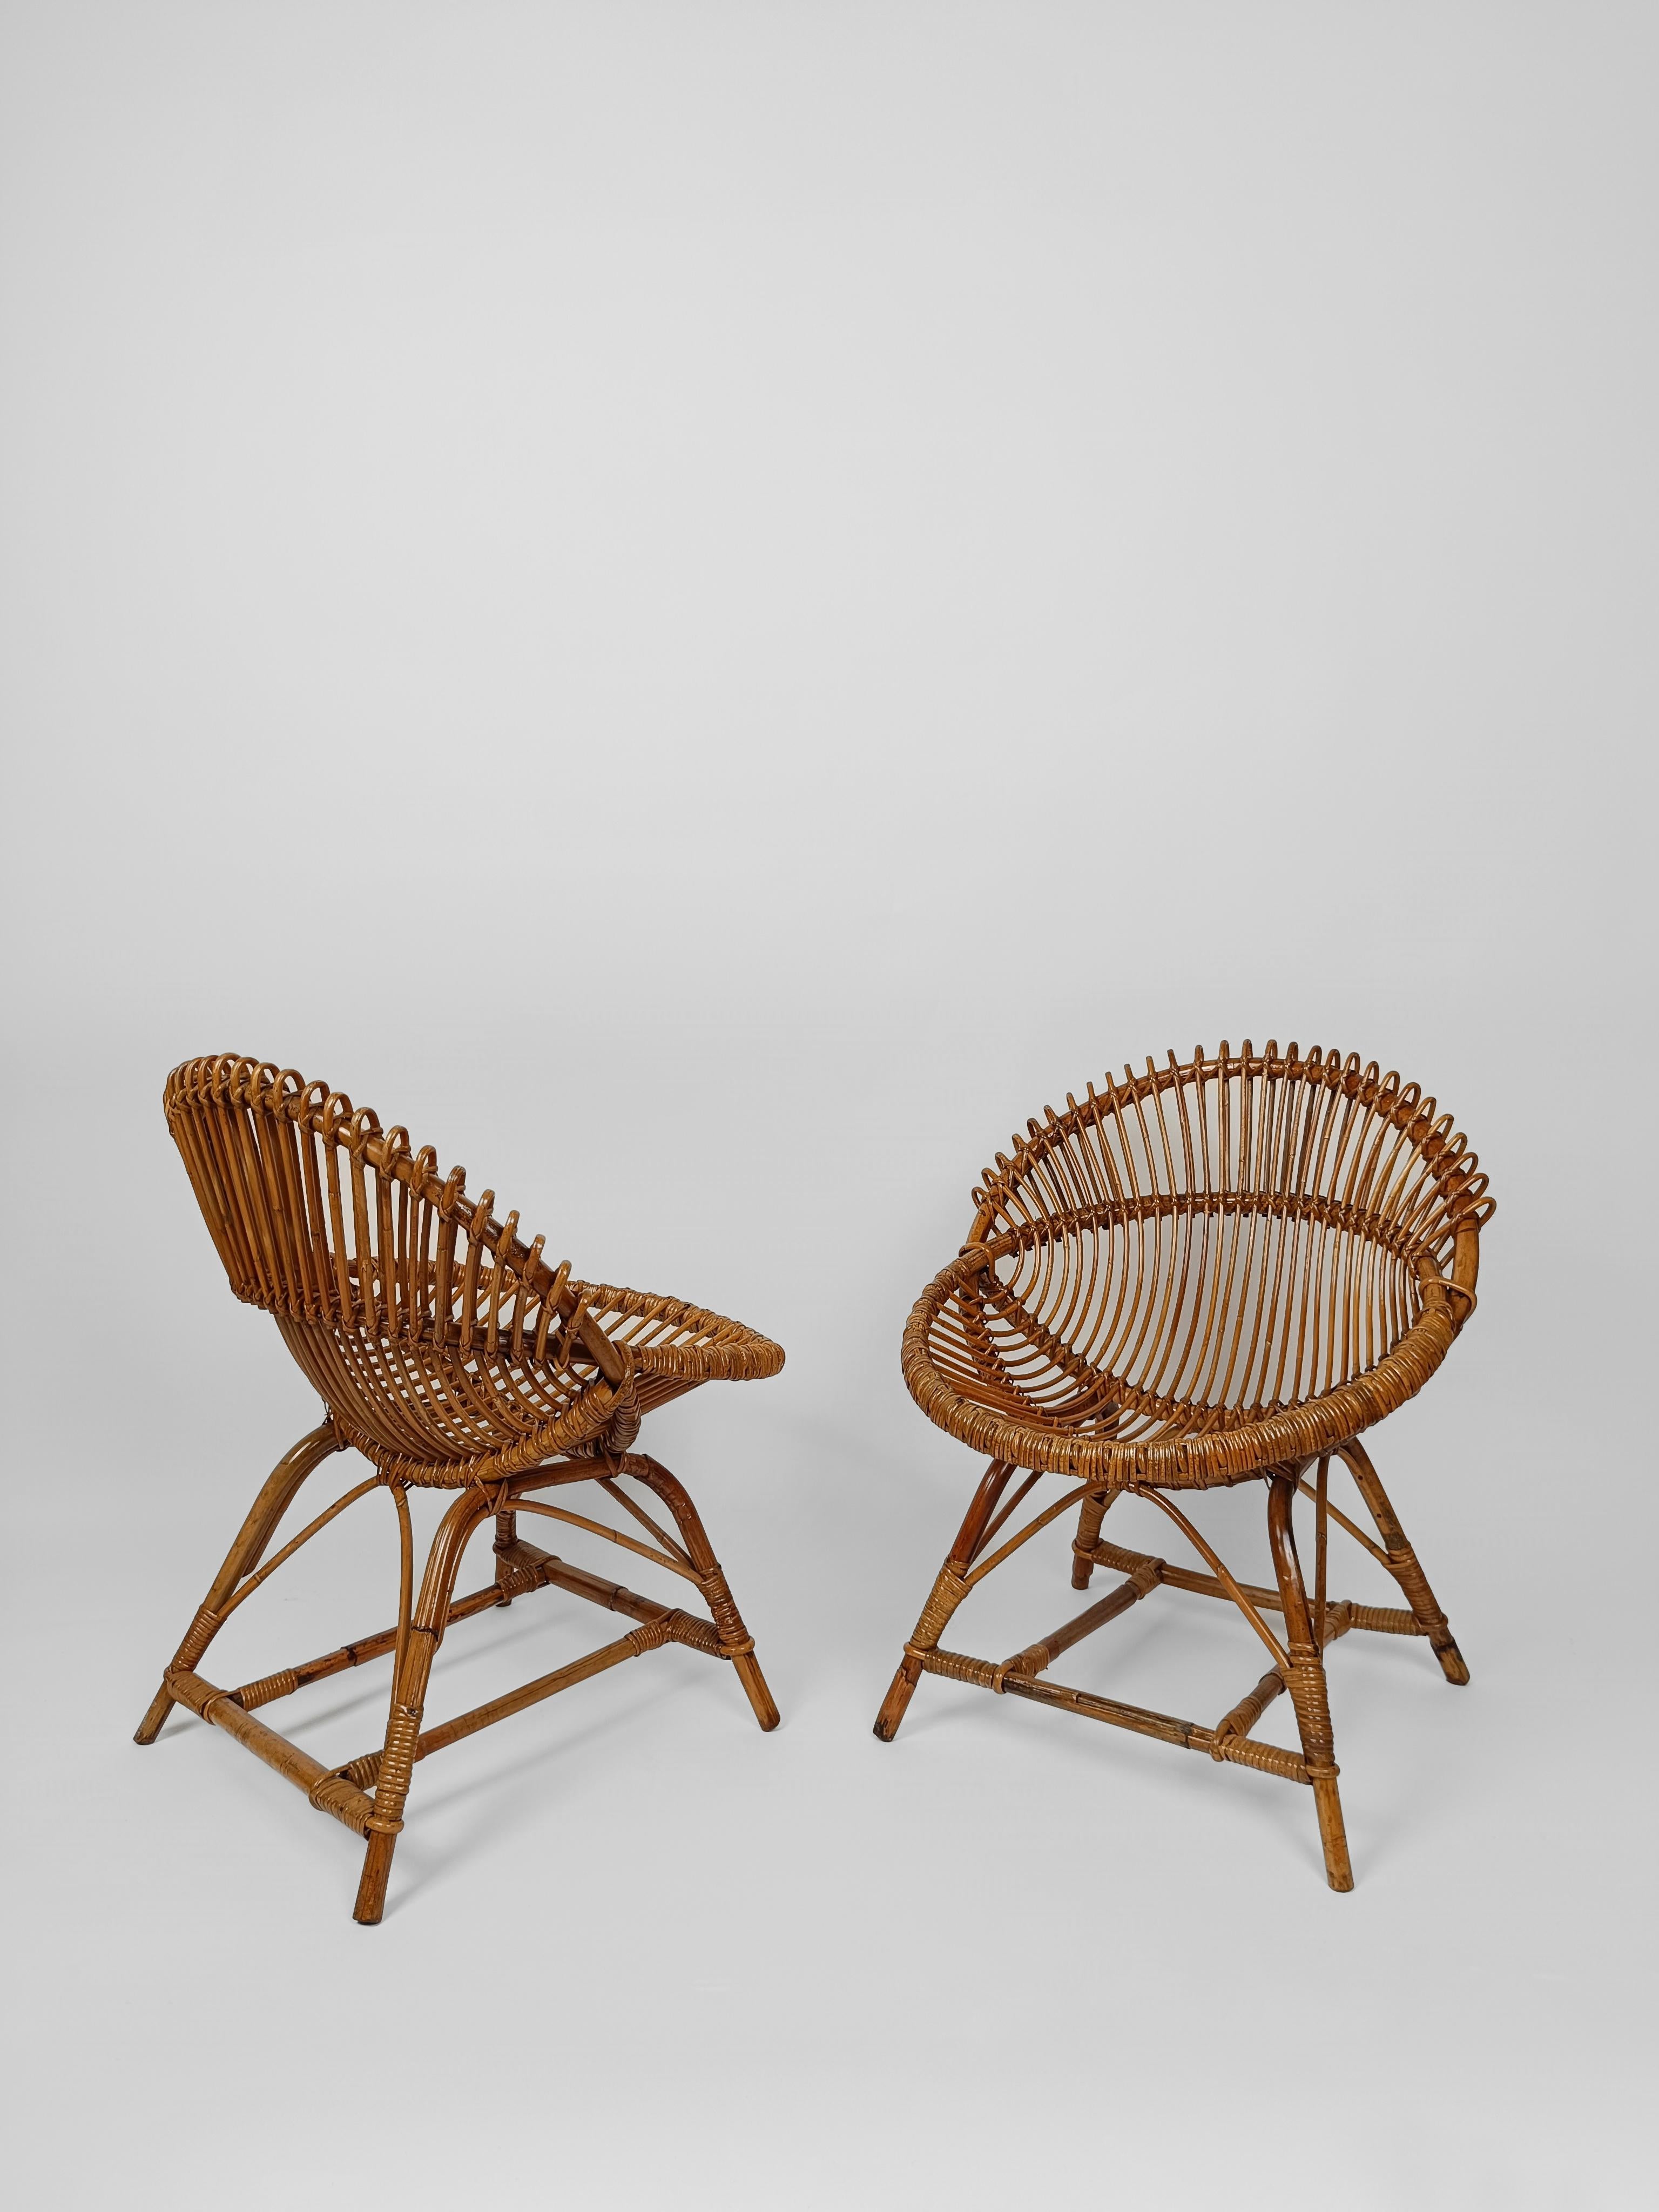 Hand-Crafted Vintage Cane and Rattan Set of 2 shell-shaped Armchairs with Coffe Table, 1960s For Sale